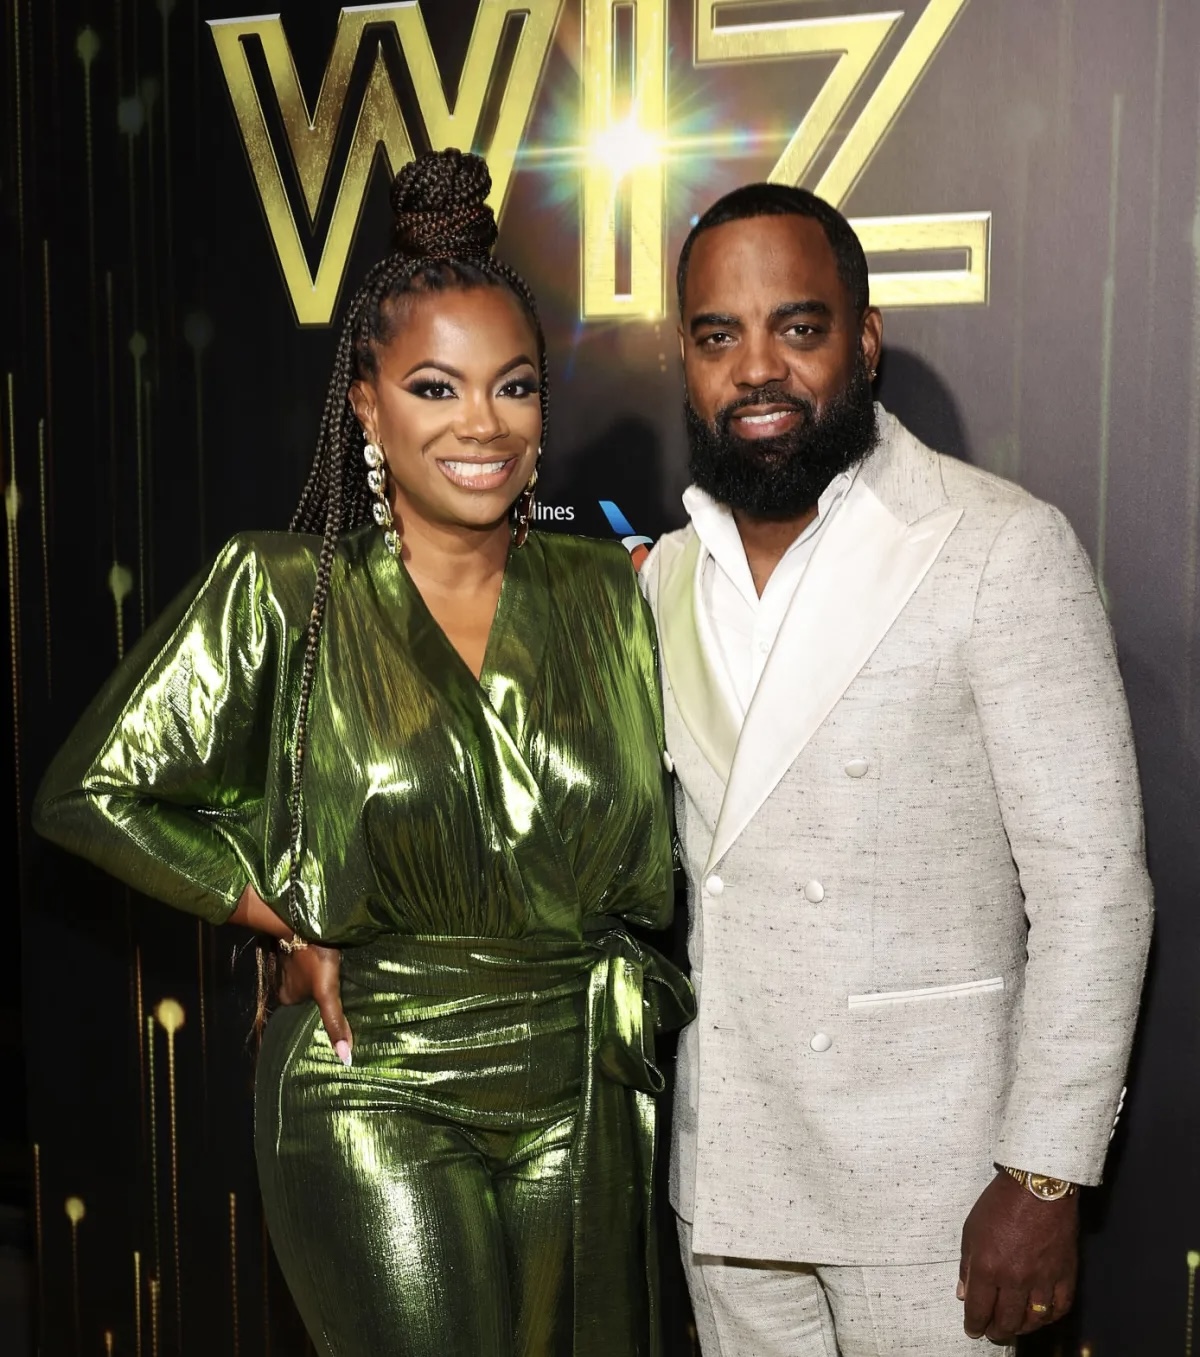 Trouble In Paradise? RHOA’s Kandi Burruss and Todd Tucker Debunk Divorce Rumors, Explain What Caused the Split Speculation